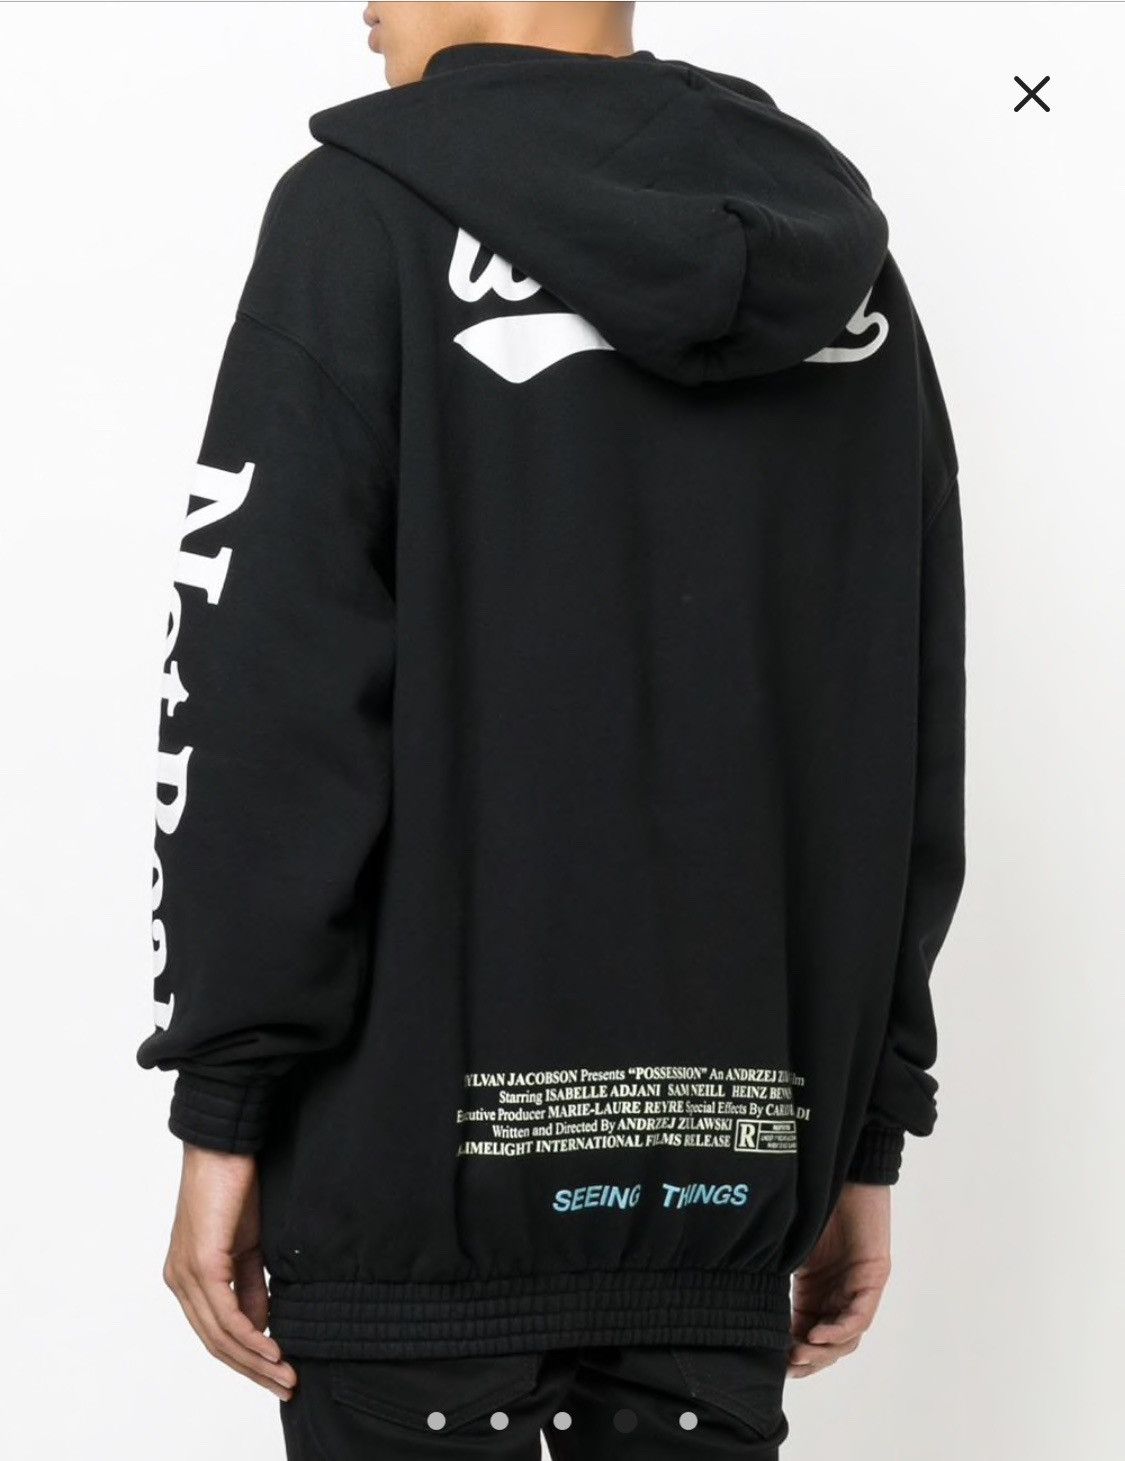 Off-White Off-White "Seeing Things" Hoodie Size US L / EU 52-54 / 3 - 3 Thumbnail